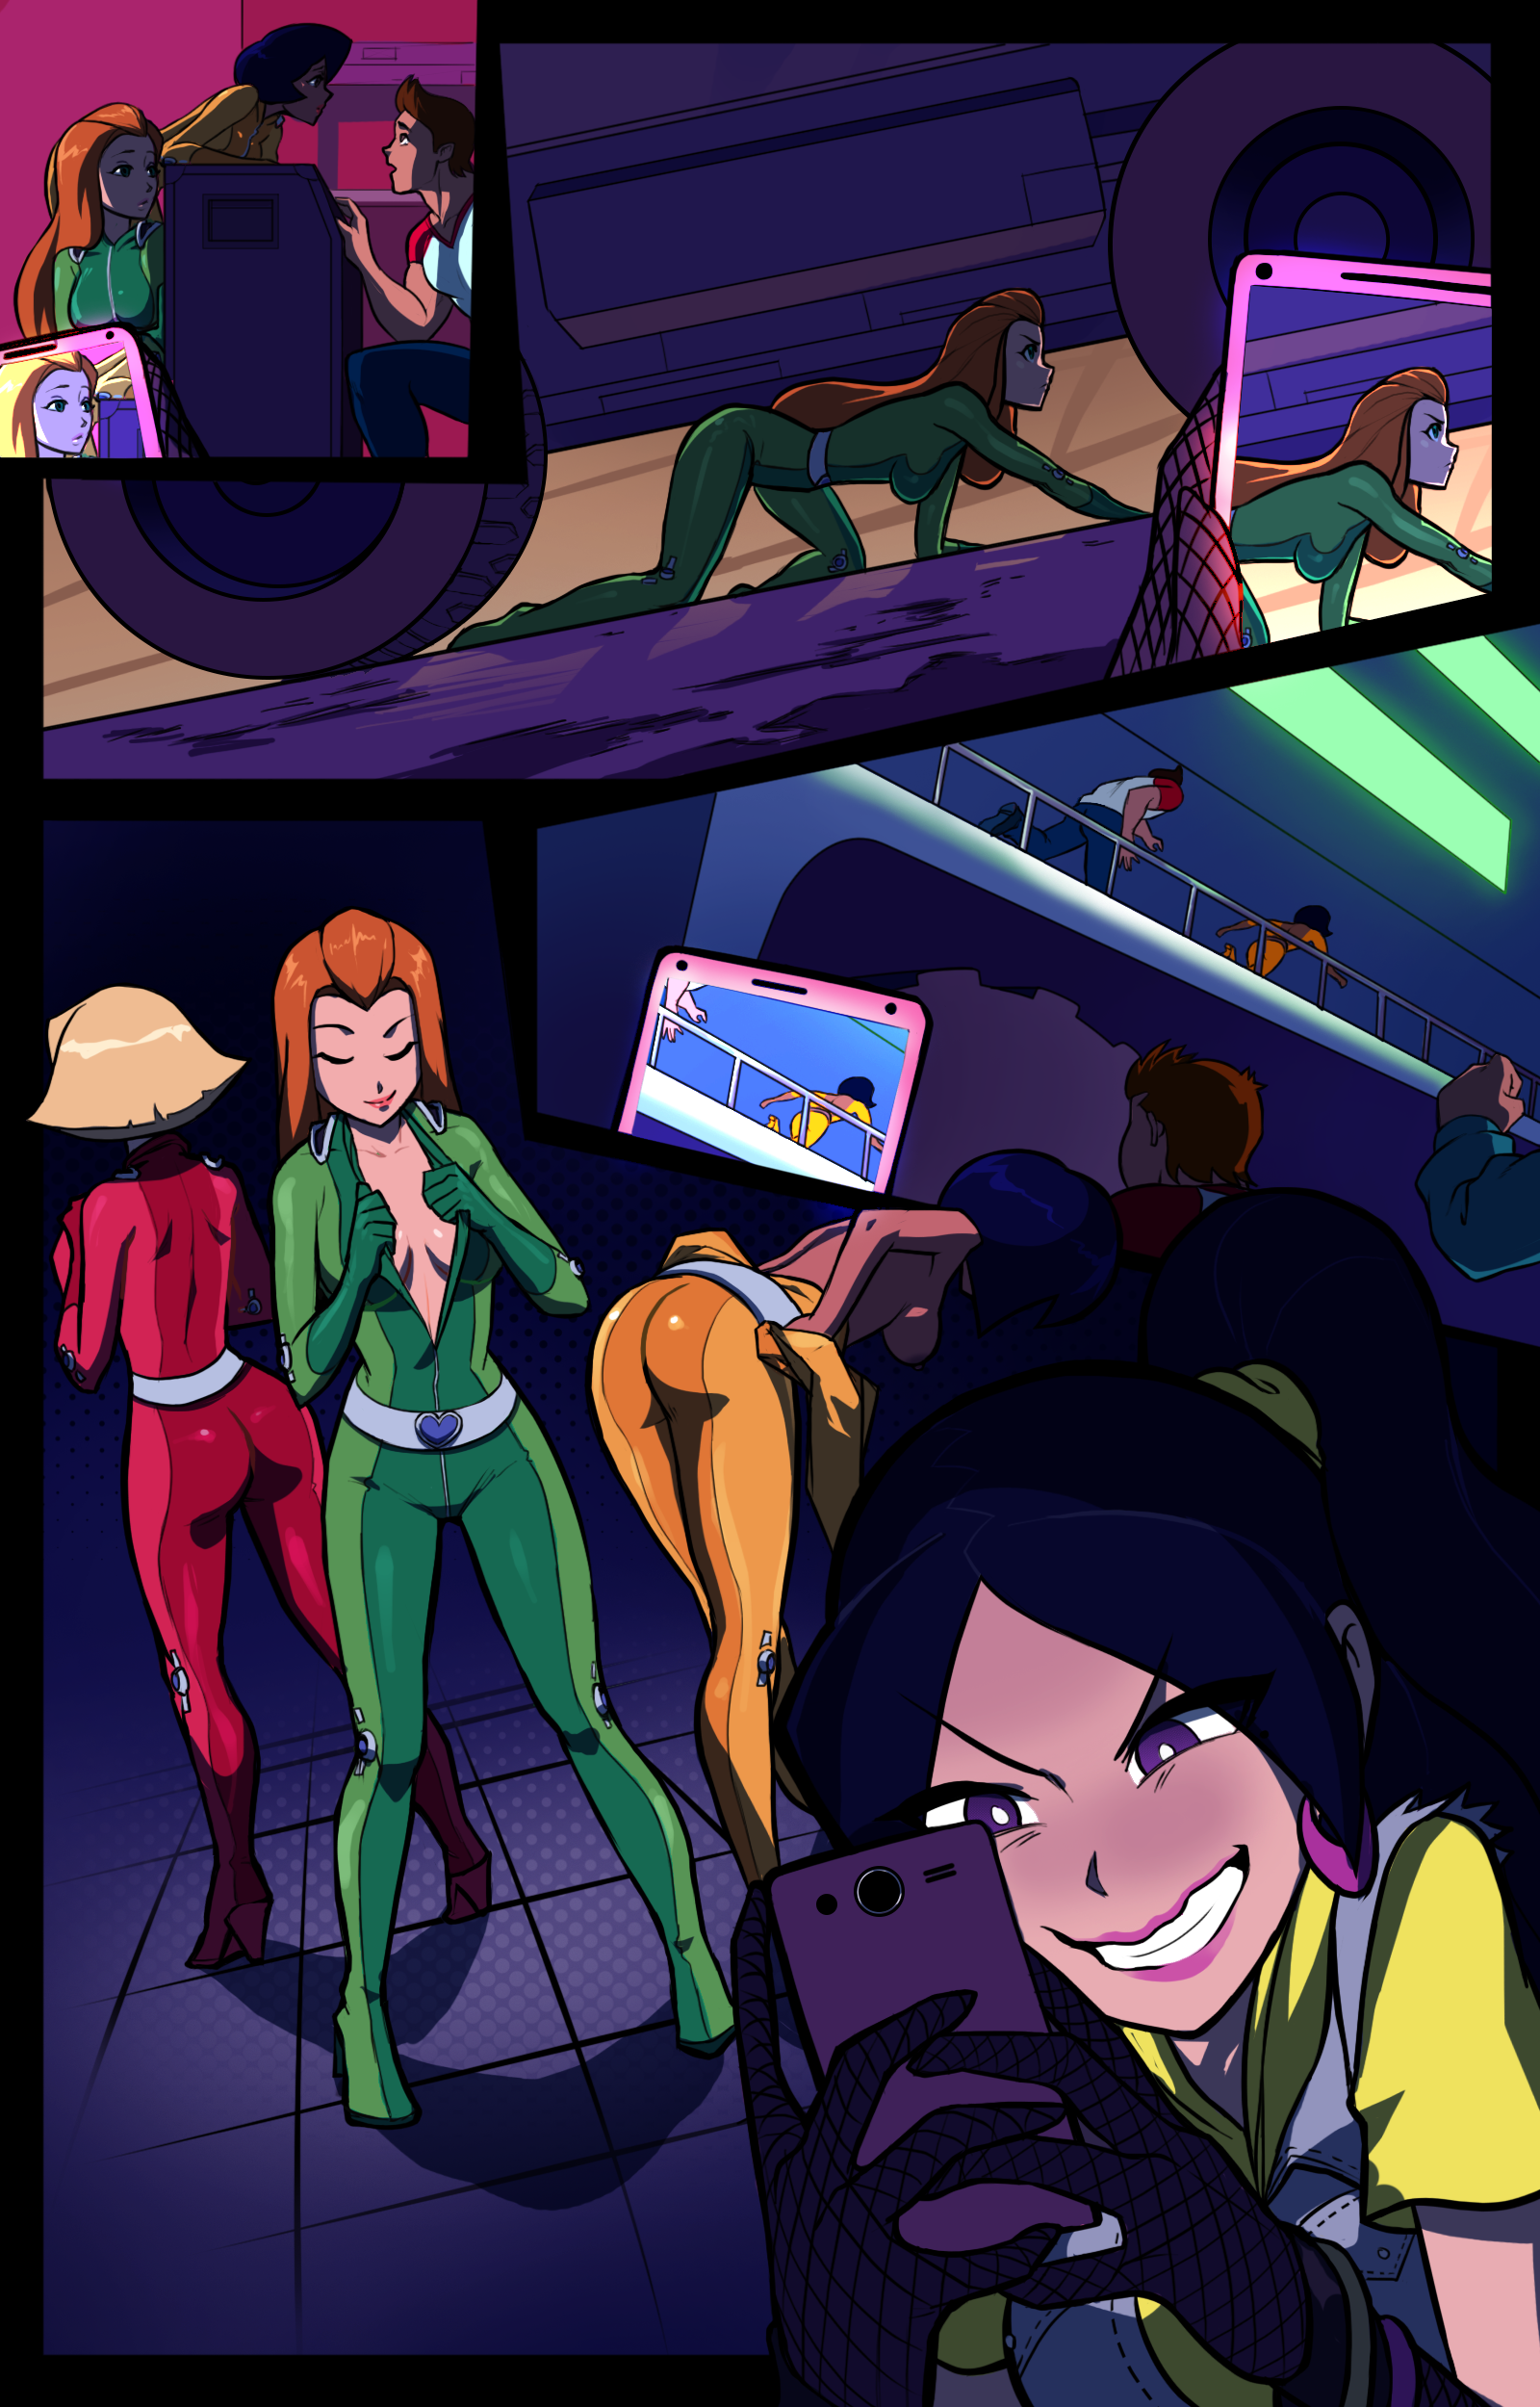 Totally Spies Hentai - Totally blackmail - Totally Spies - KingComiX.com